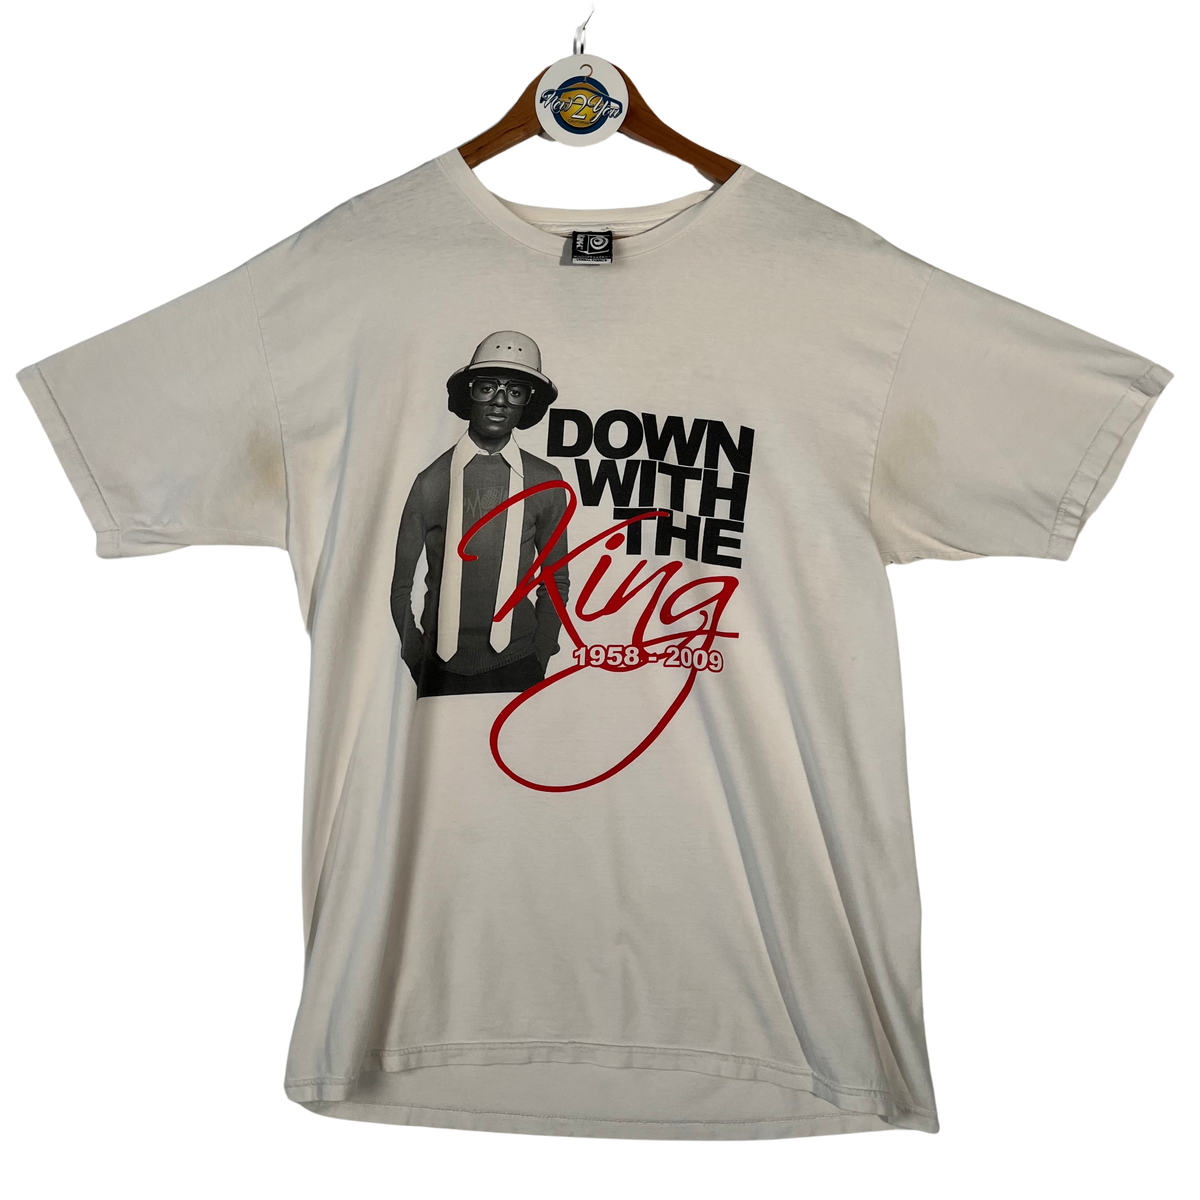 Michael Jackson 'Down With The King' 1958-2009 Graphic Tee - White